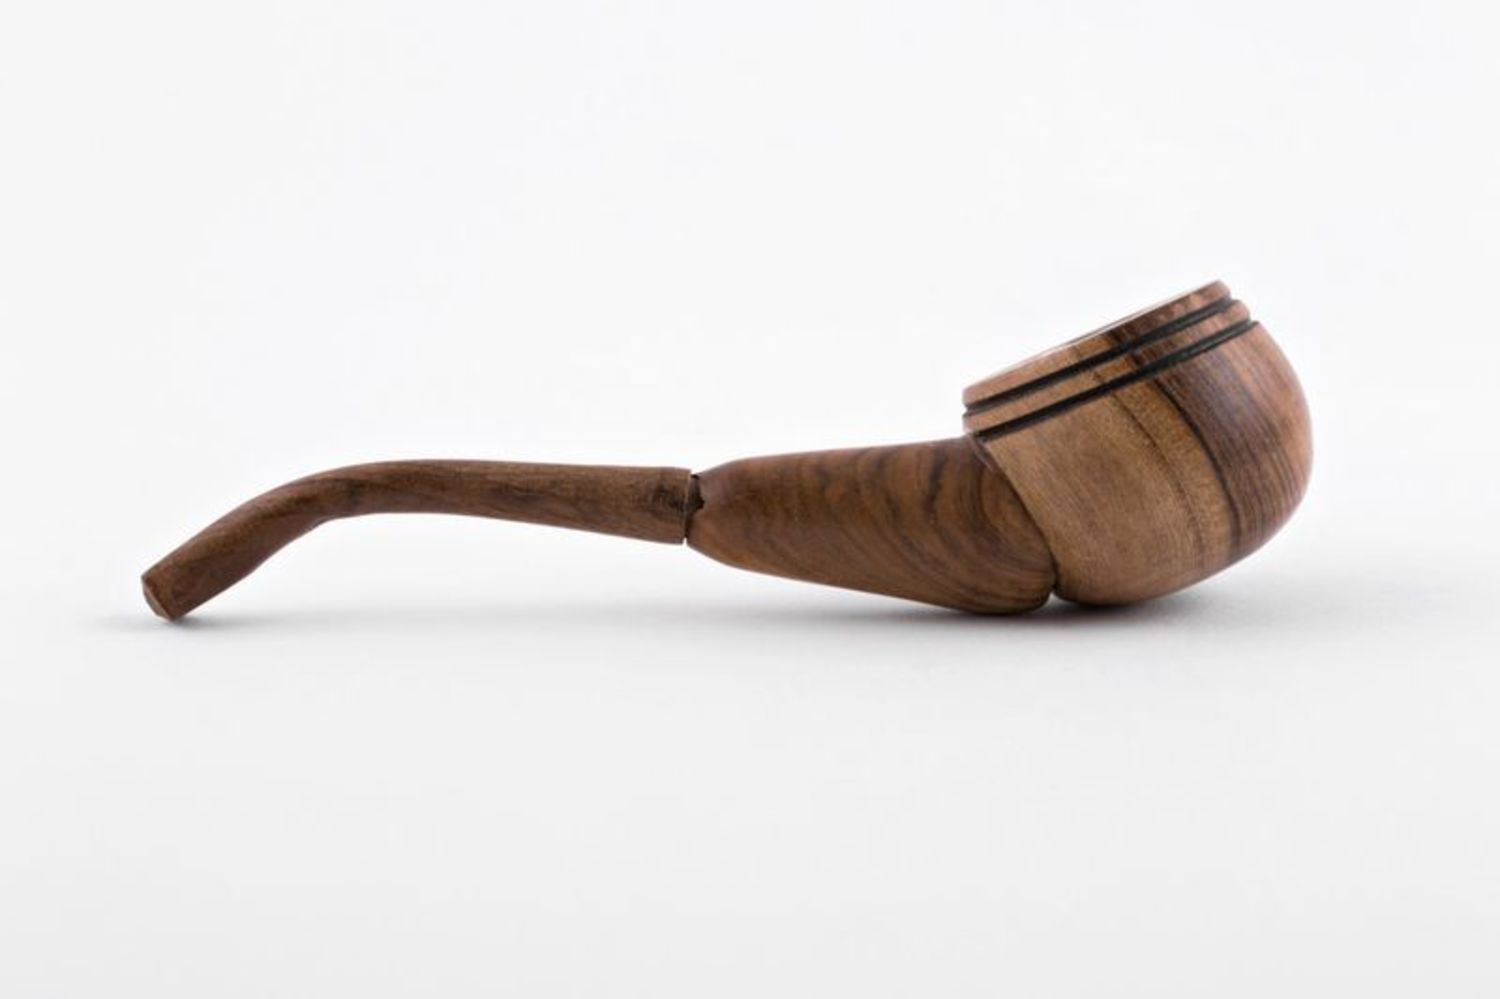 Decorative smoking pipe made of wood for decorative use only photo 3